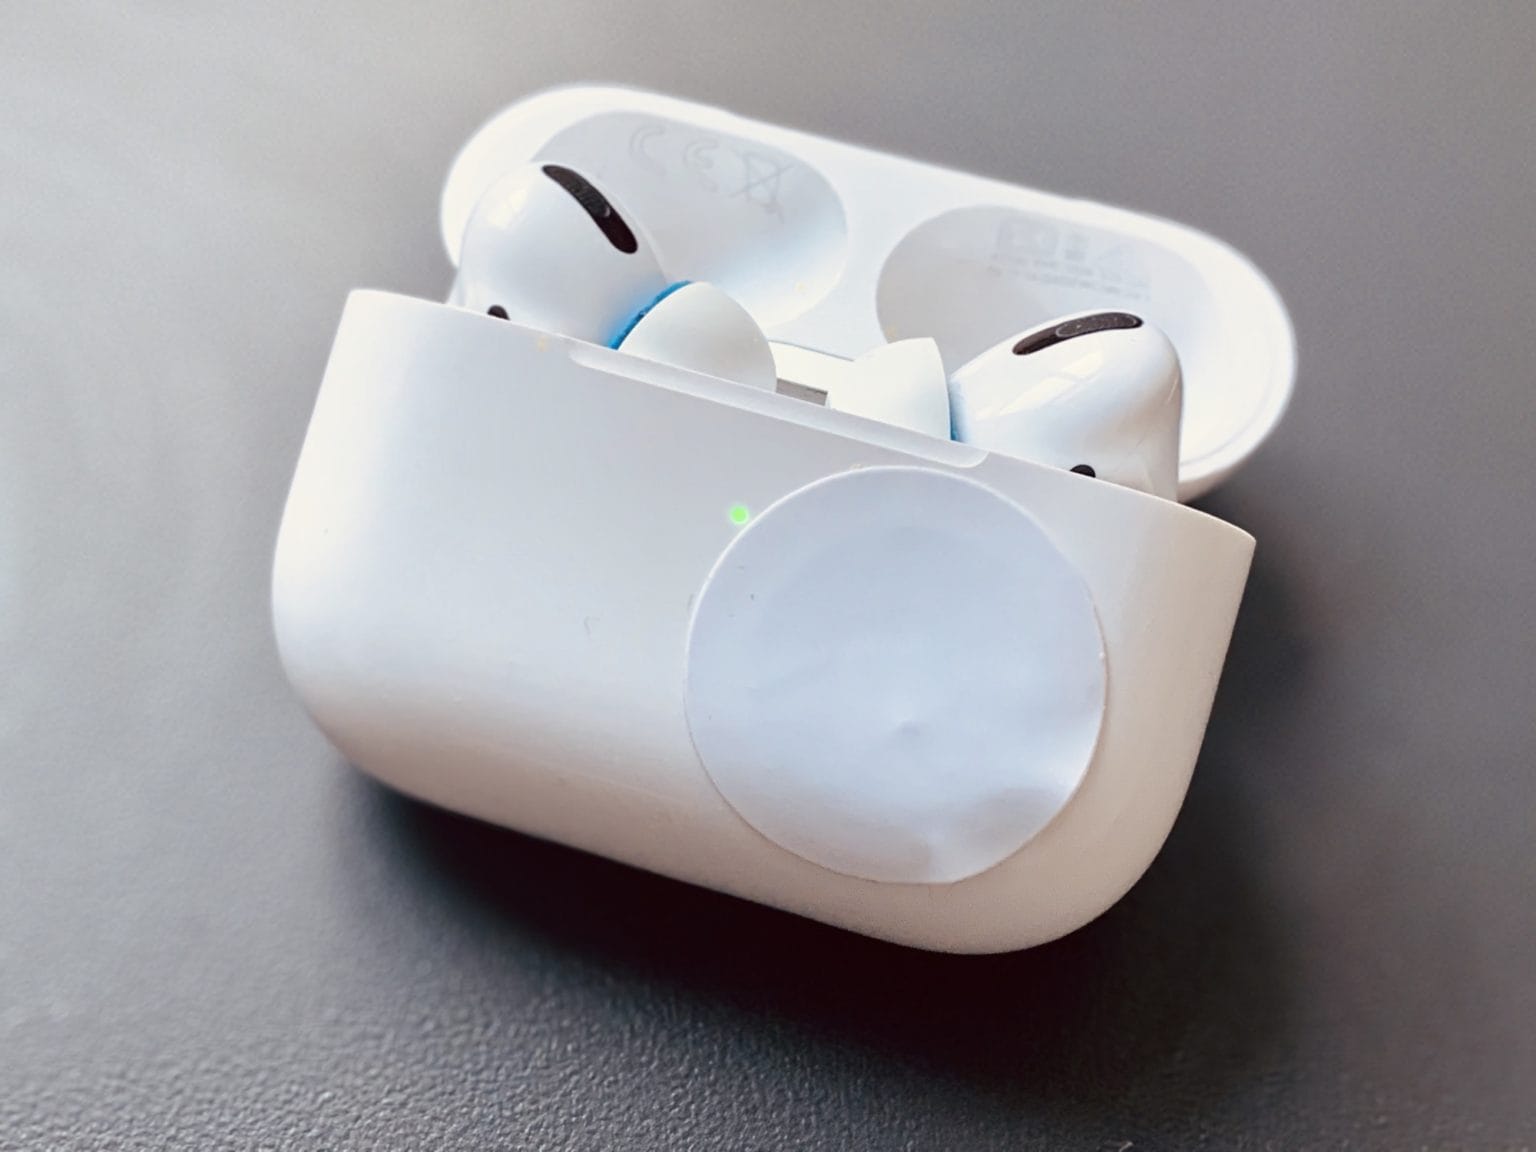 airpods connect